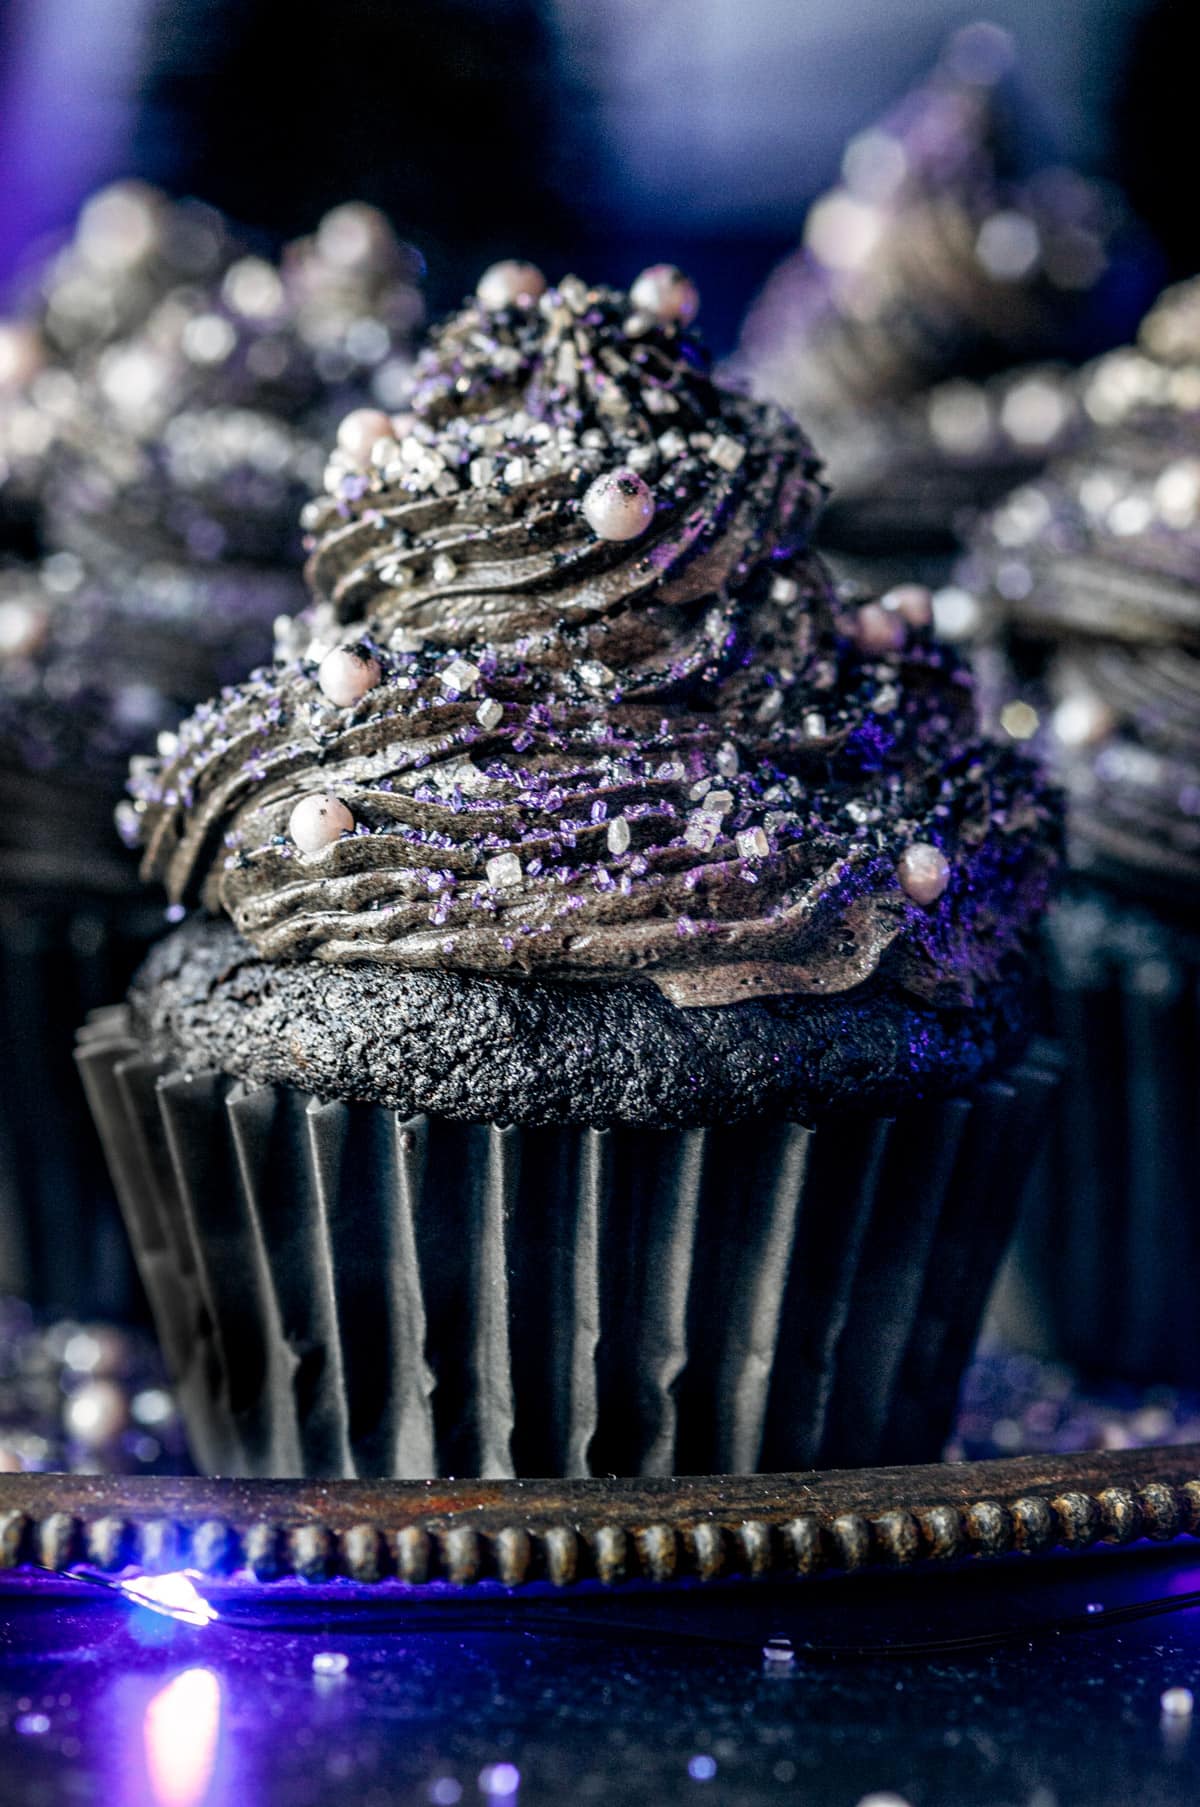 Black velvet cupcakes topped with sanding sugar and sprinkles on gray metal plate